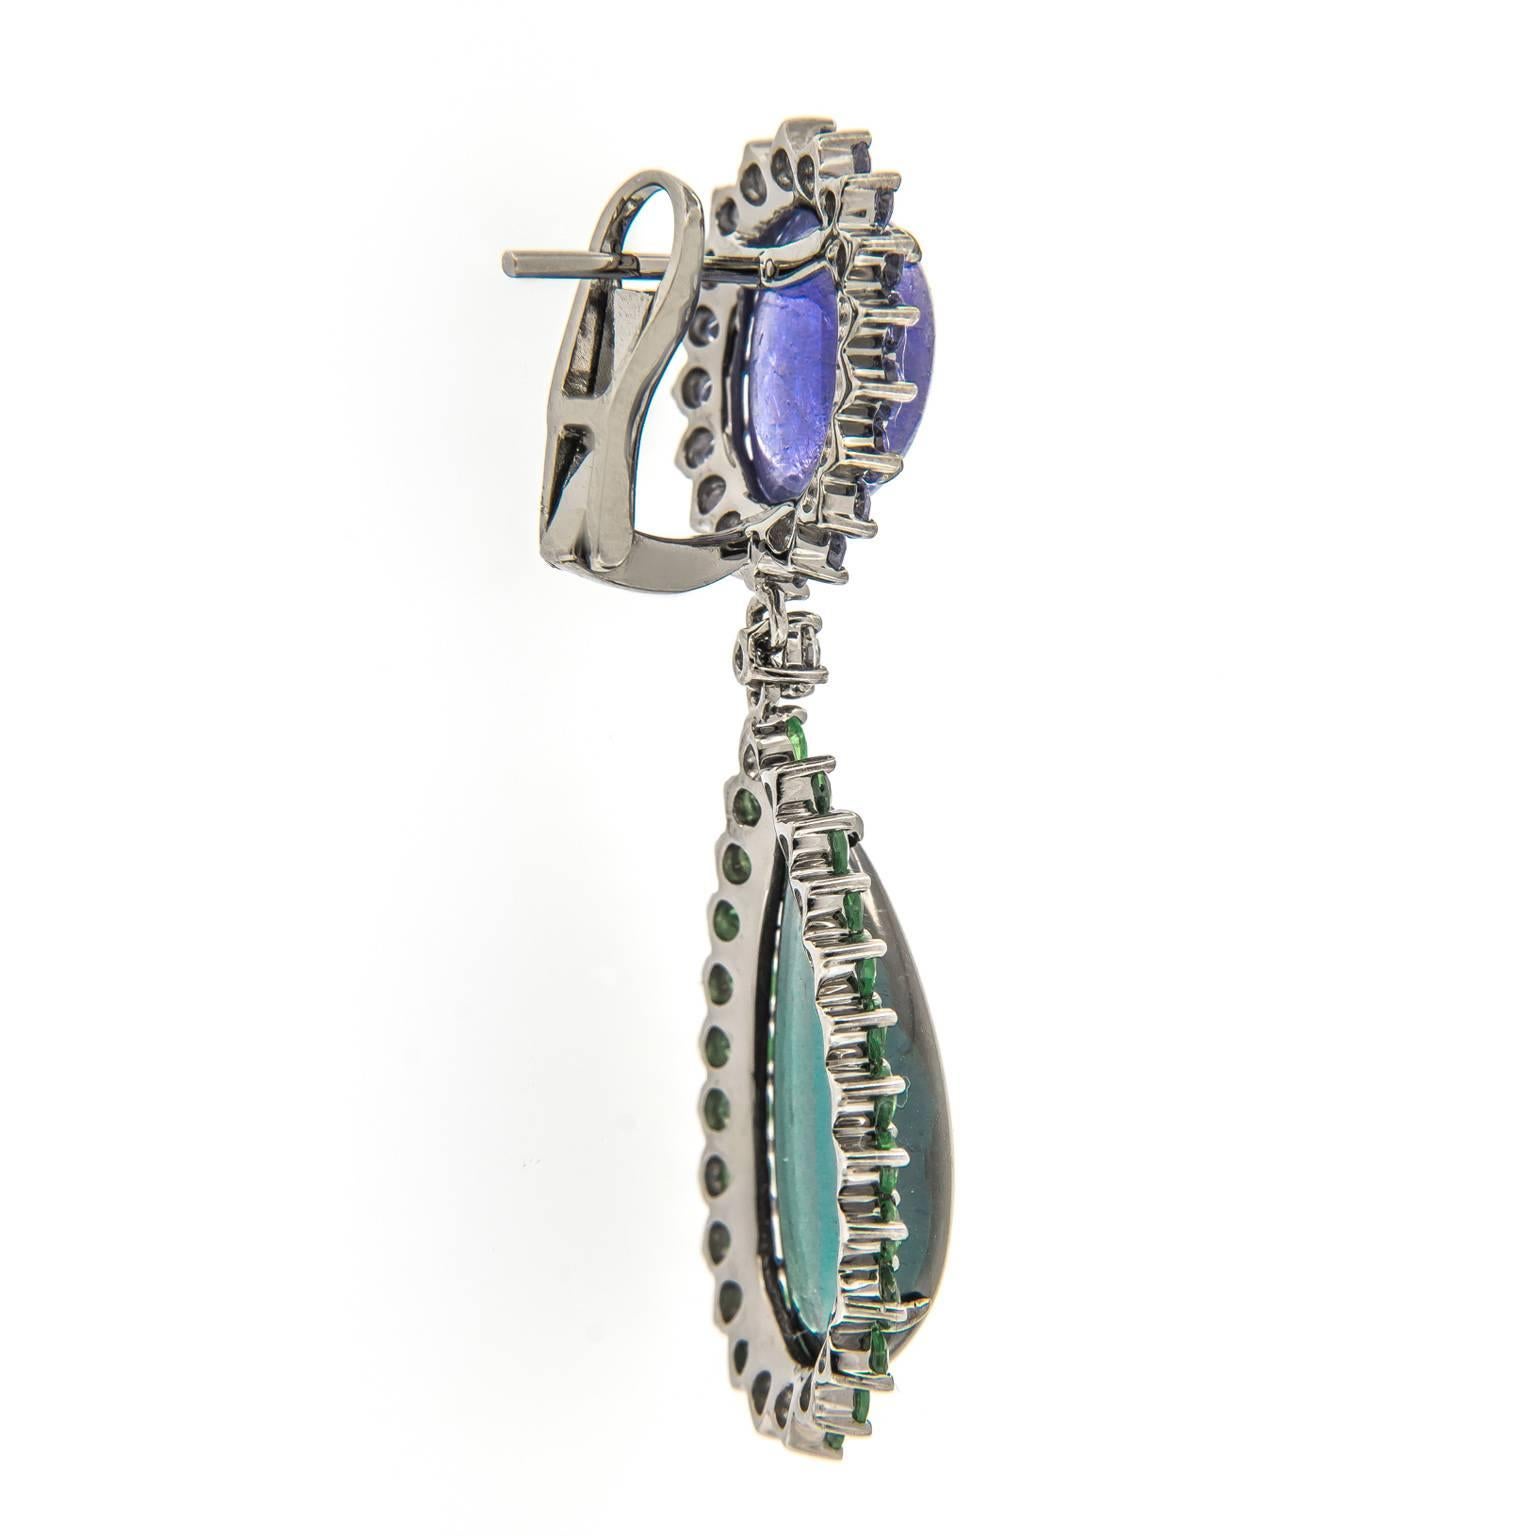 Make it an enchanted evening with these glamorous drop earrings featuring oval tanzanite framed by round tanzanites and teardrop green tourmalines framed by green garnets. Drop connected by a single round-shape diamond. Earrings crafted in 18k white